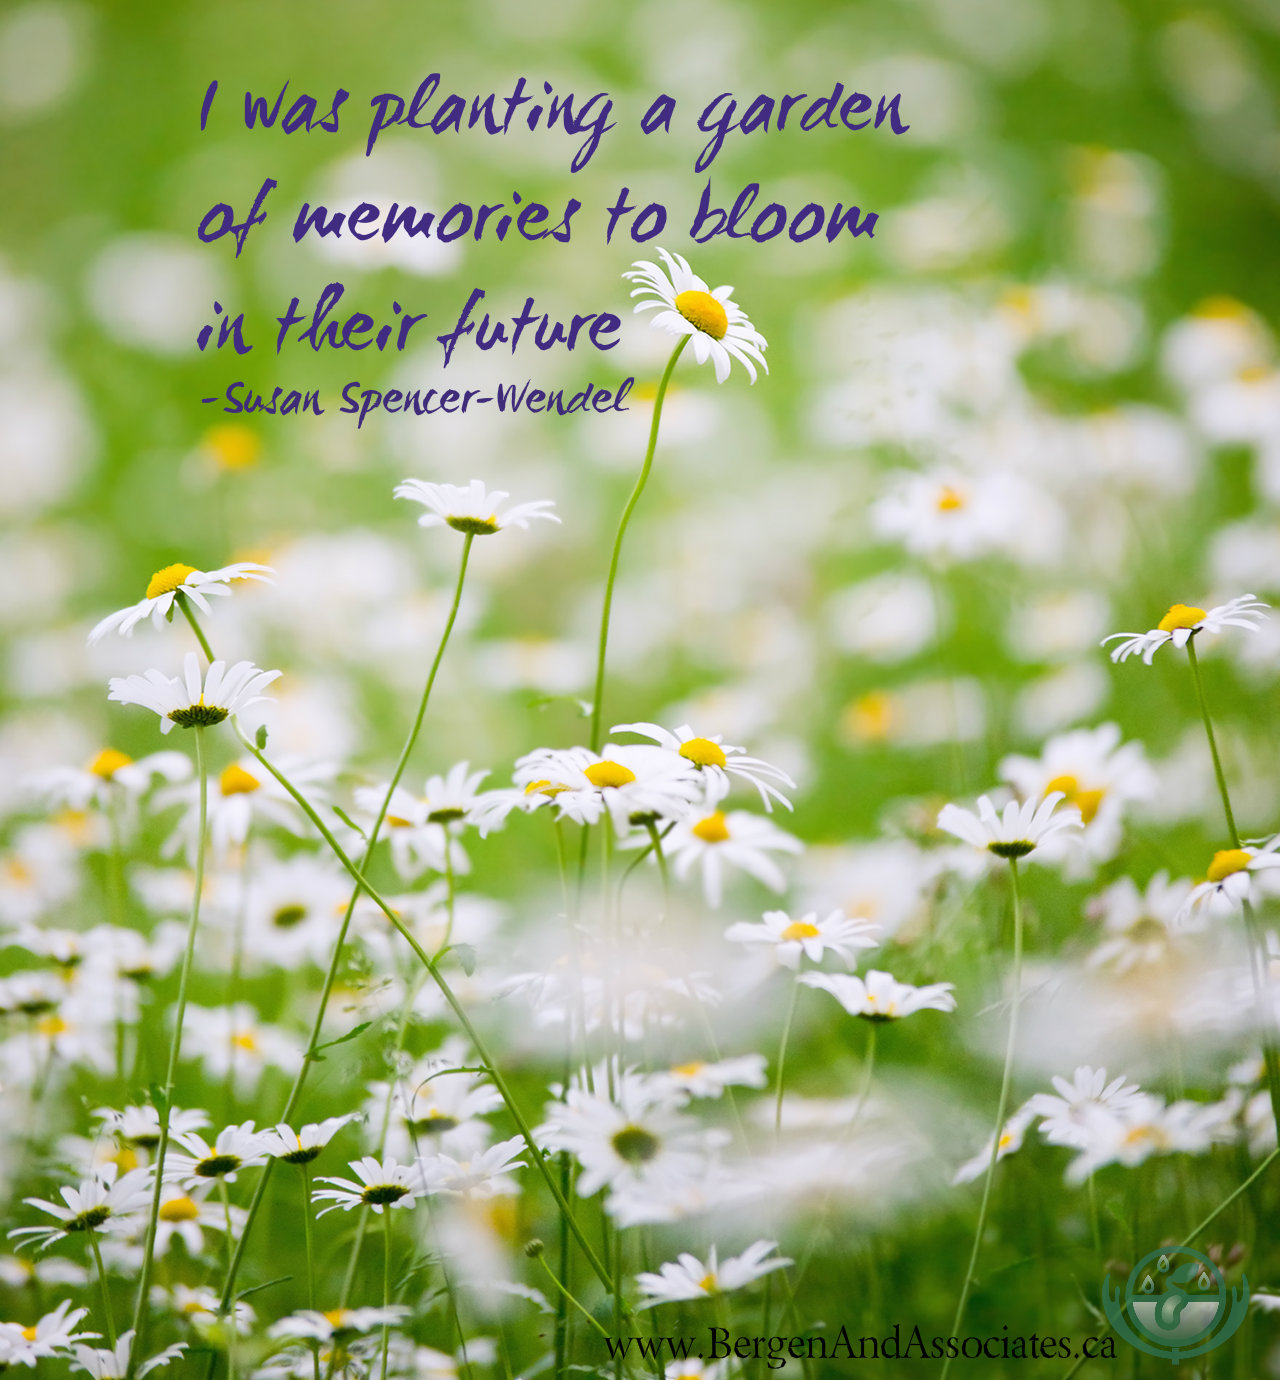 Photo quoting Susan Spencer Wendel who says her activities were like planting seed in the garden to blossom as memories